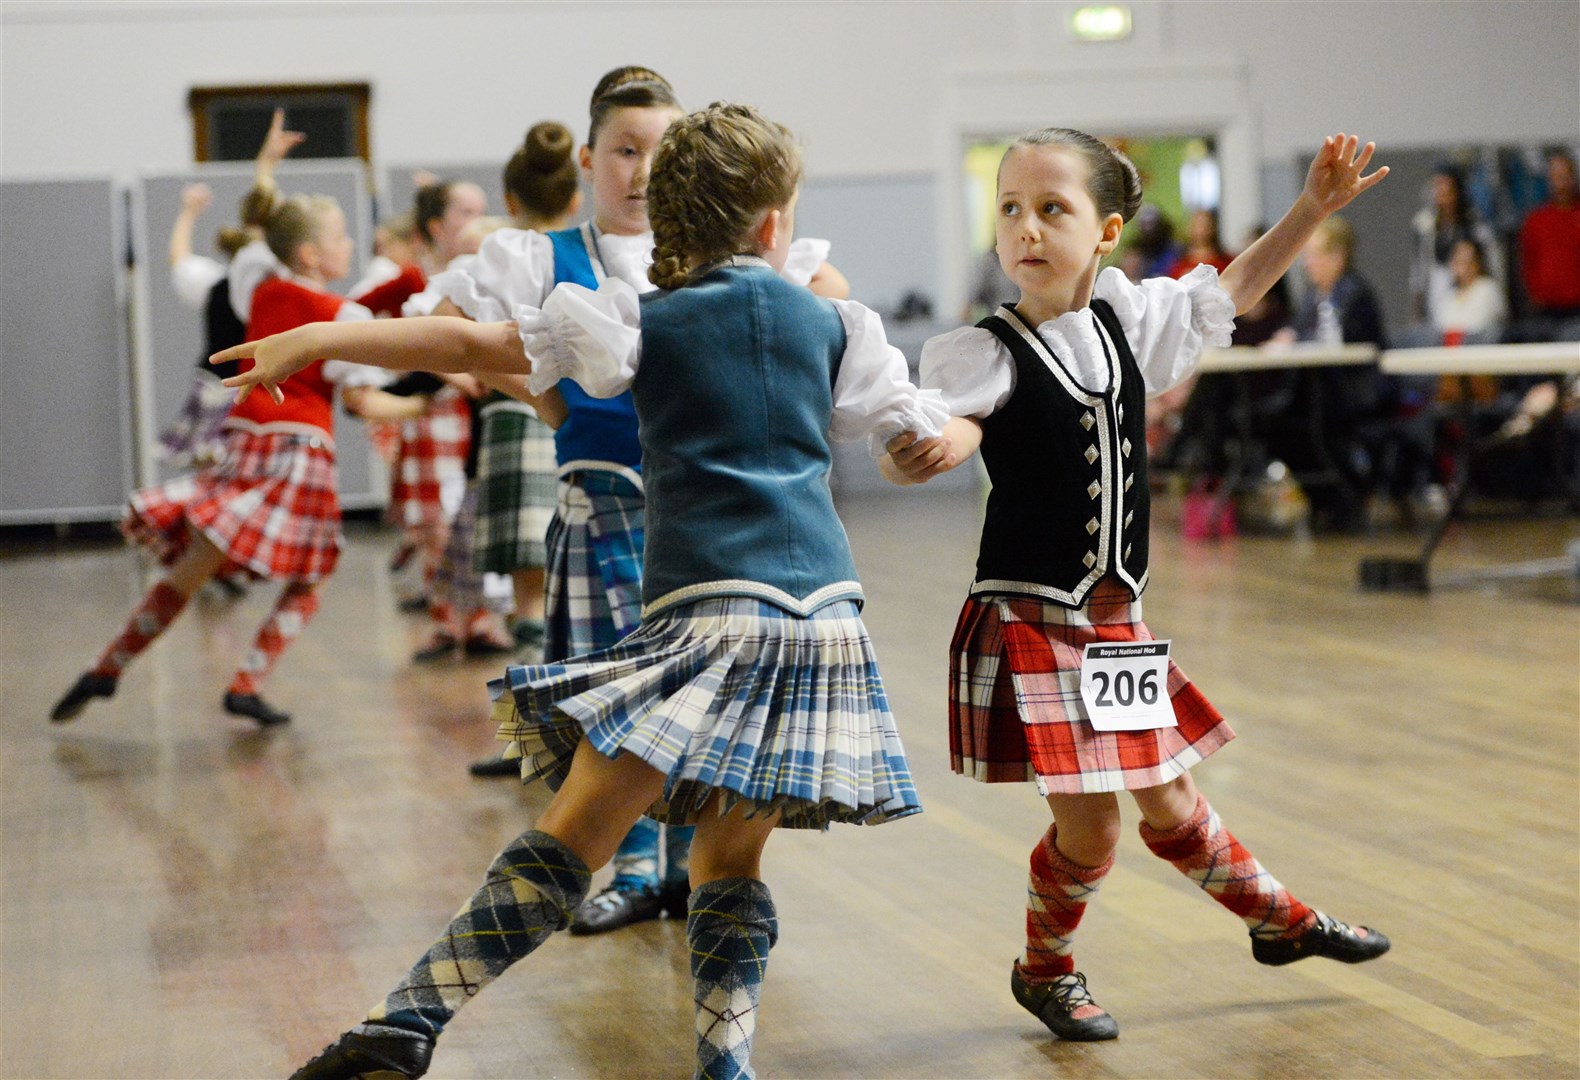 Rhianna Grant from Inverness (right) competes in the Beginners 7years and under category..Highland Dancing at the Mod 2014..Picture: Alison White. Image No.027144.